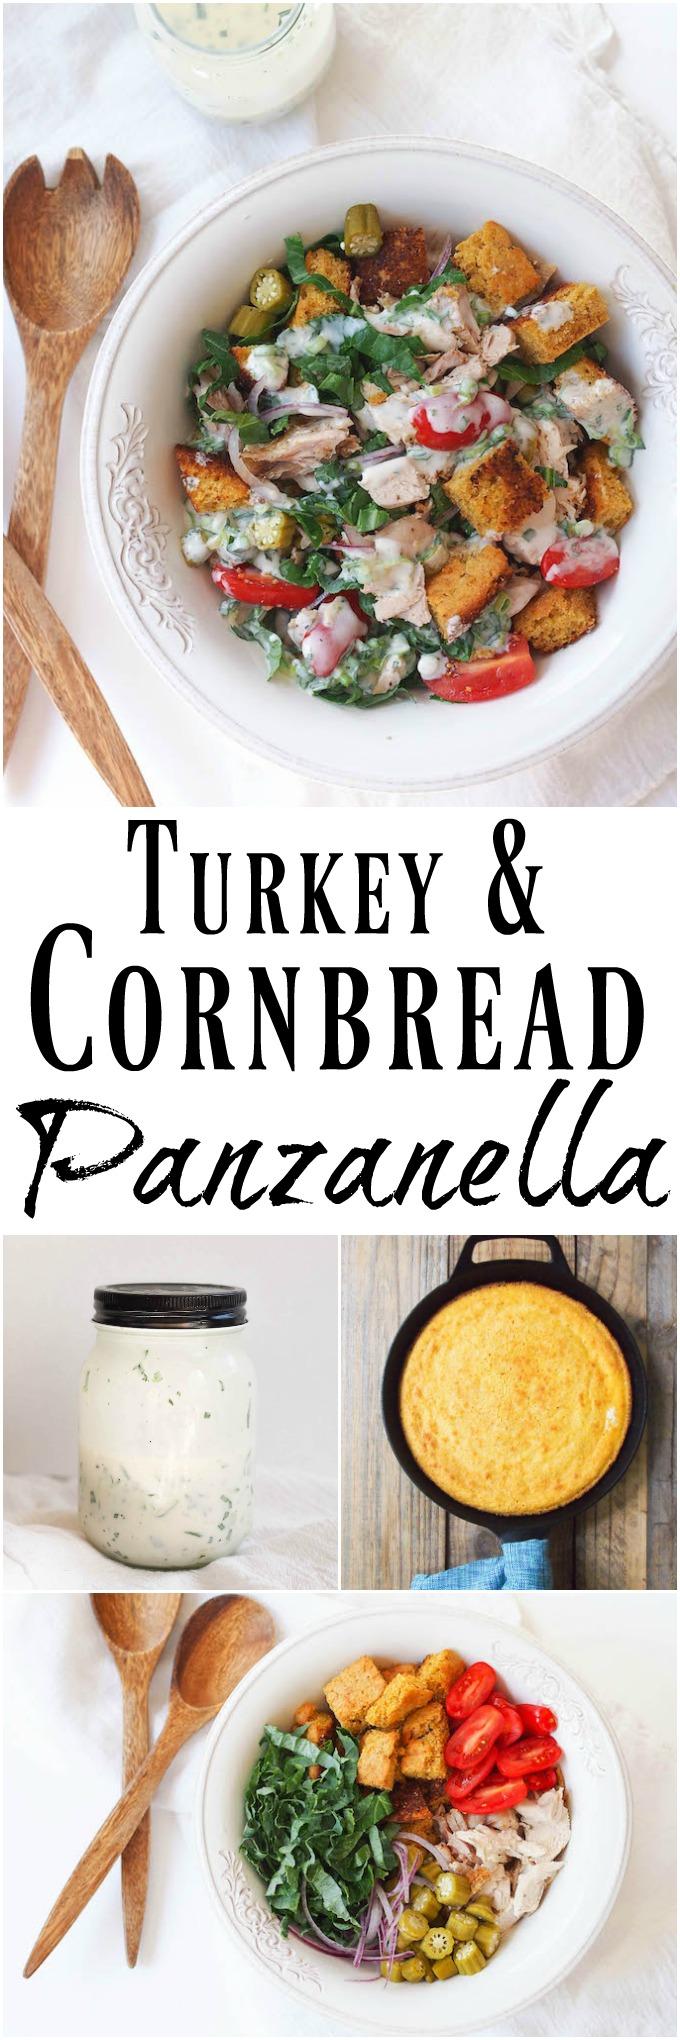 This Turkey and Cornbread Panzanella is the perfect recipe to use up your Thanksgiving leftovers! Enjoy this healthy bread salad for lunch while watching football!